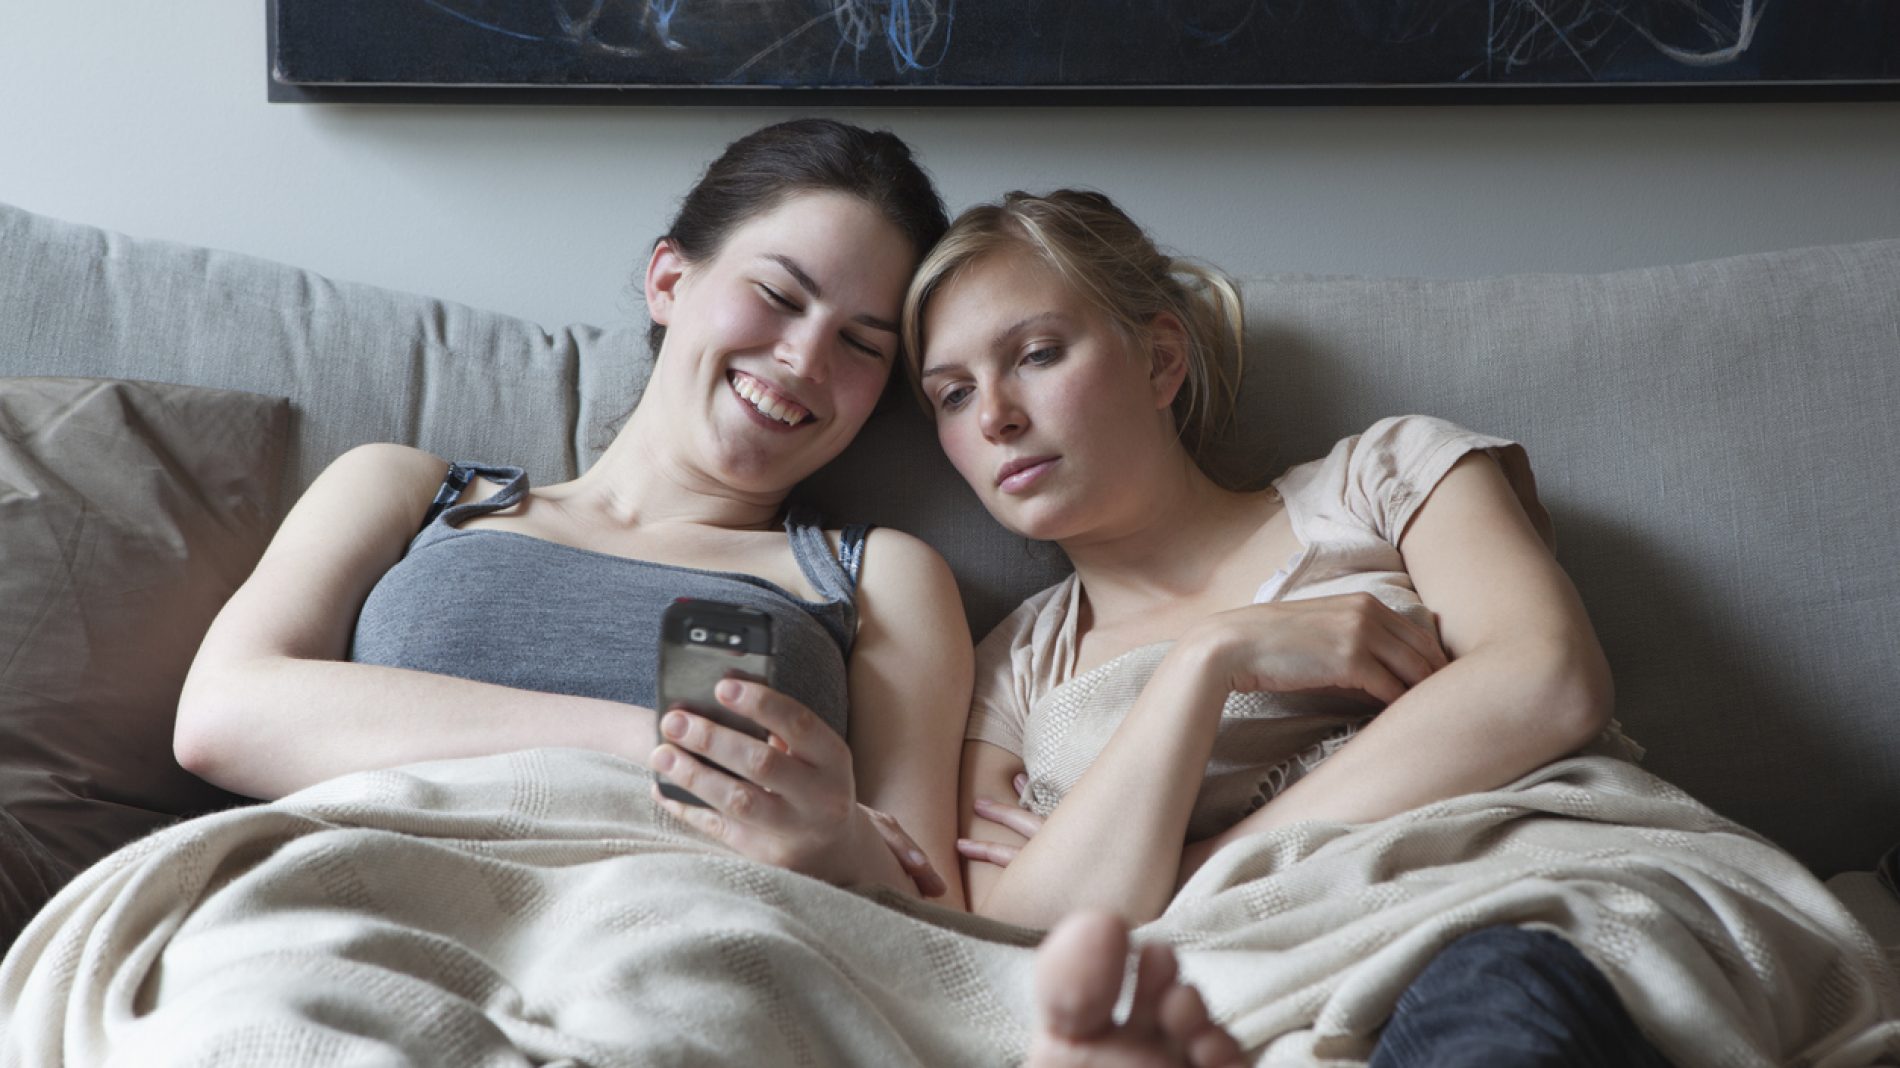 2 young women sit on a couch together looking at a phone